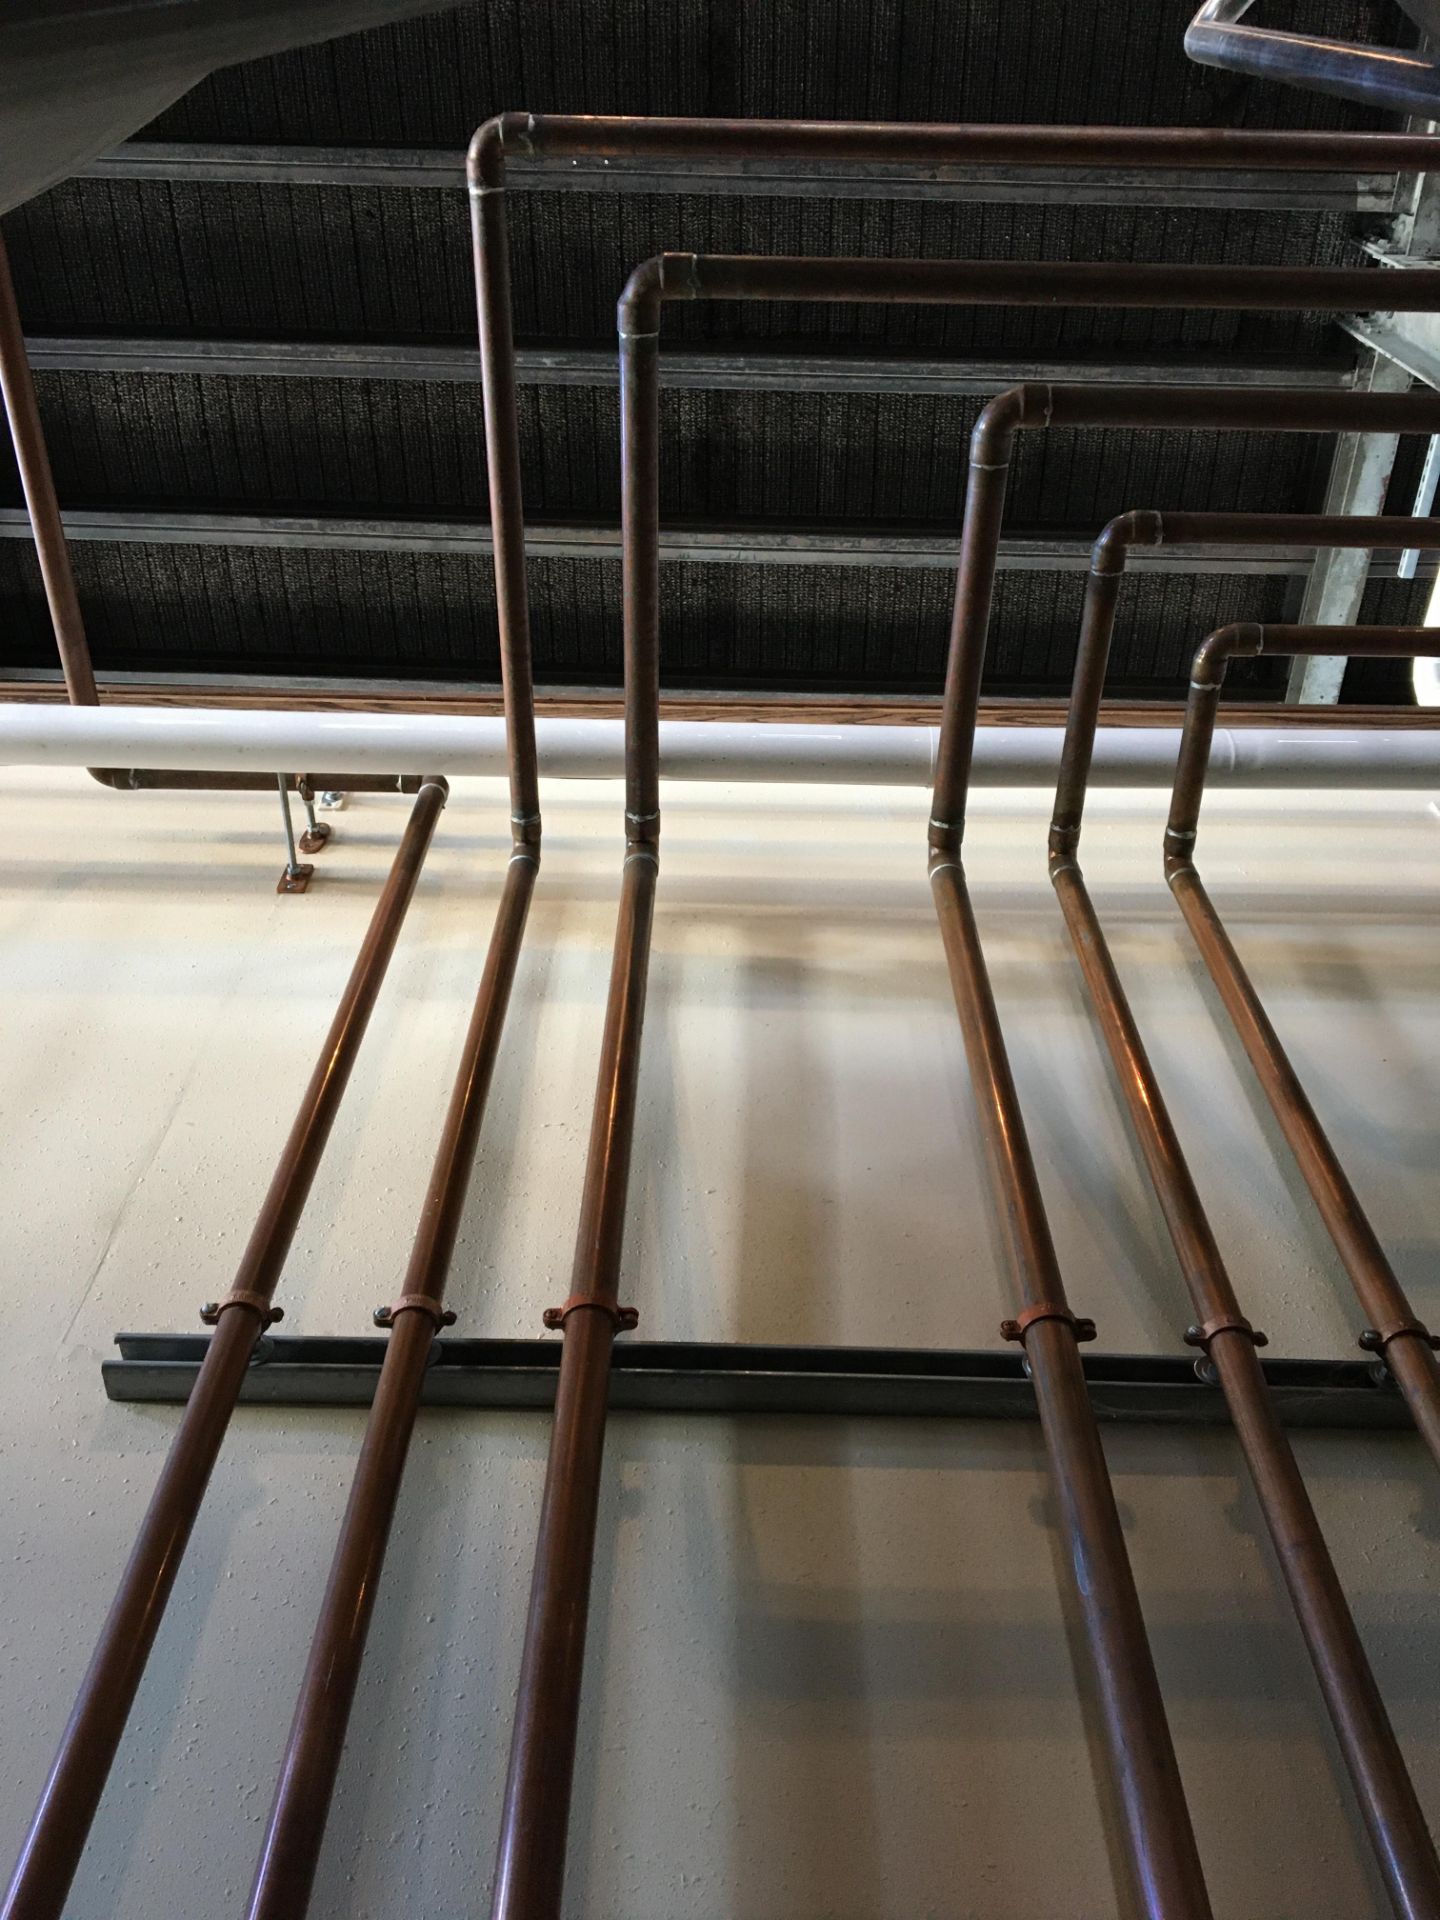 Approx. 500 Feet of Copper Pipe, Copper Pipe; only the copper pipe to do with the brewery - Image 6 of 29